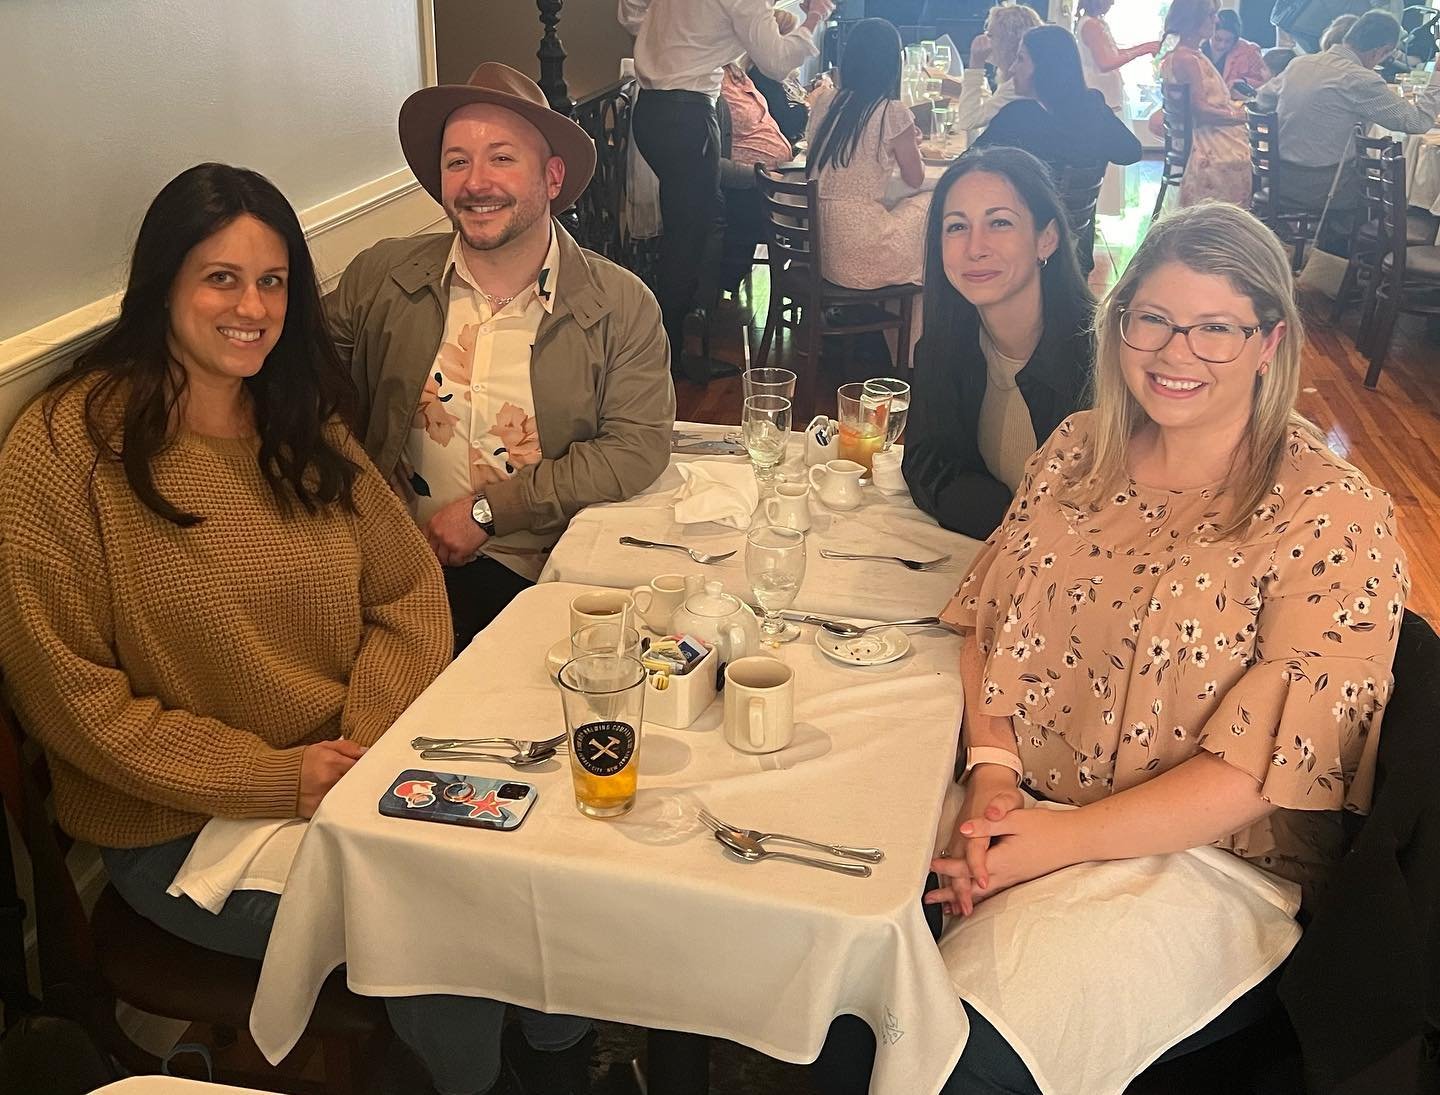 We had so much fun celebrating Anchor Therapy&rsquo;s 7 year anniversary this weekend at @amandasrestaurant 🎉🎊! We love getting together in-person as a team and having fun together. If you&rsquo;re a therapist looking for a great team to join, we&r